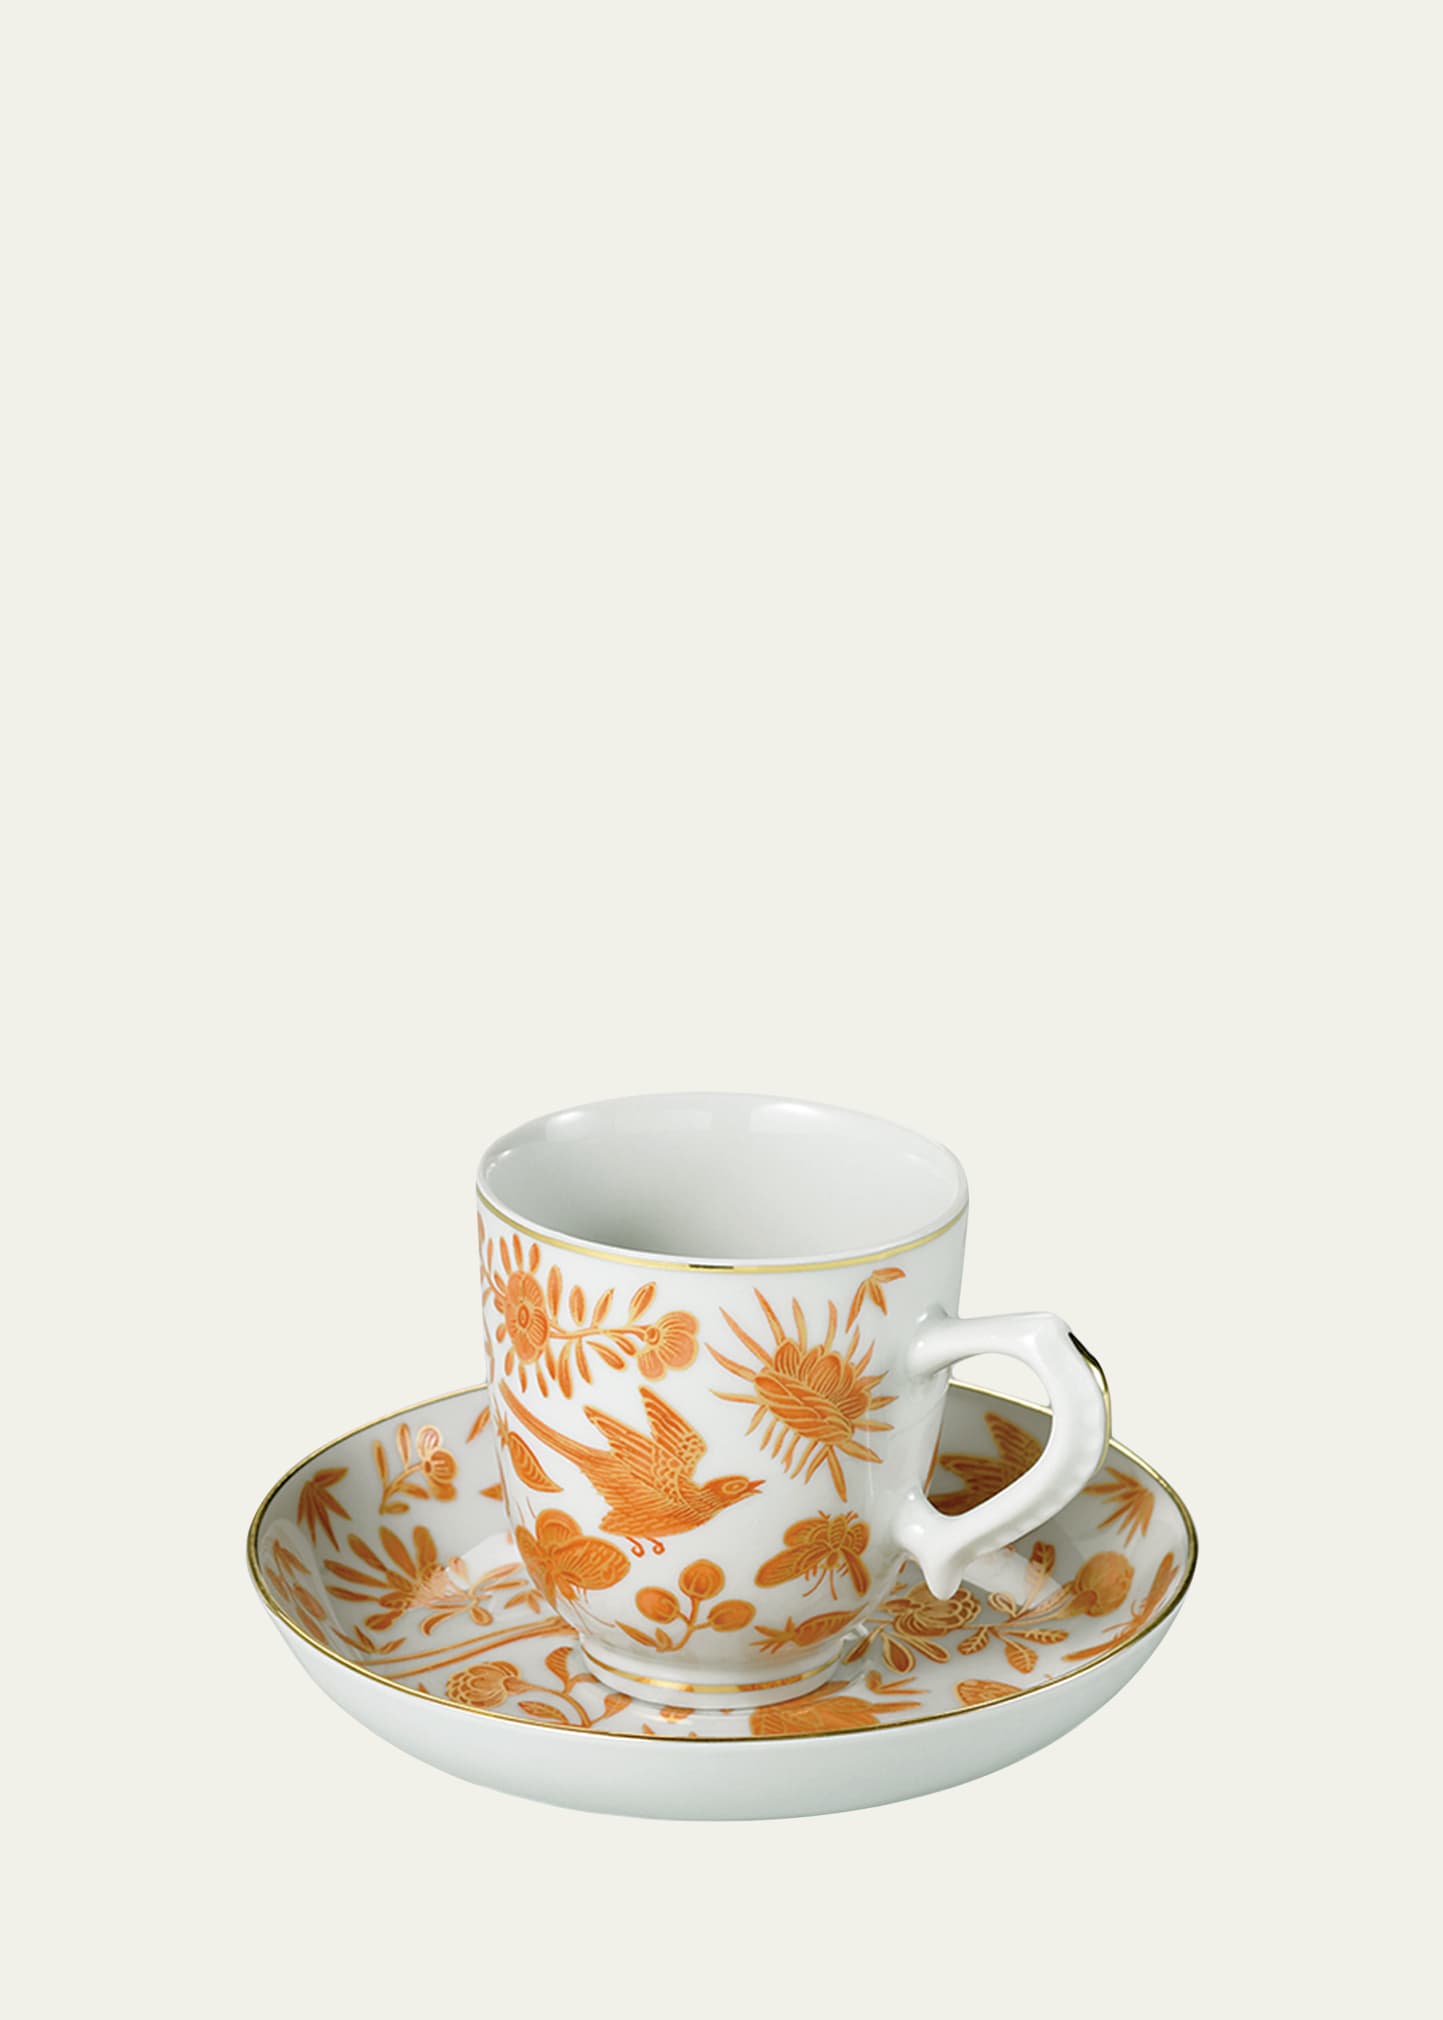 Mottahedeh Sacred Bird & Butterfly Demitasse Cup & Saucer Plate In Orange